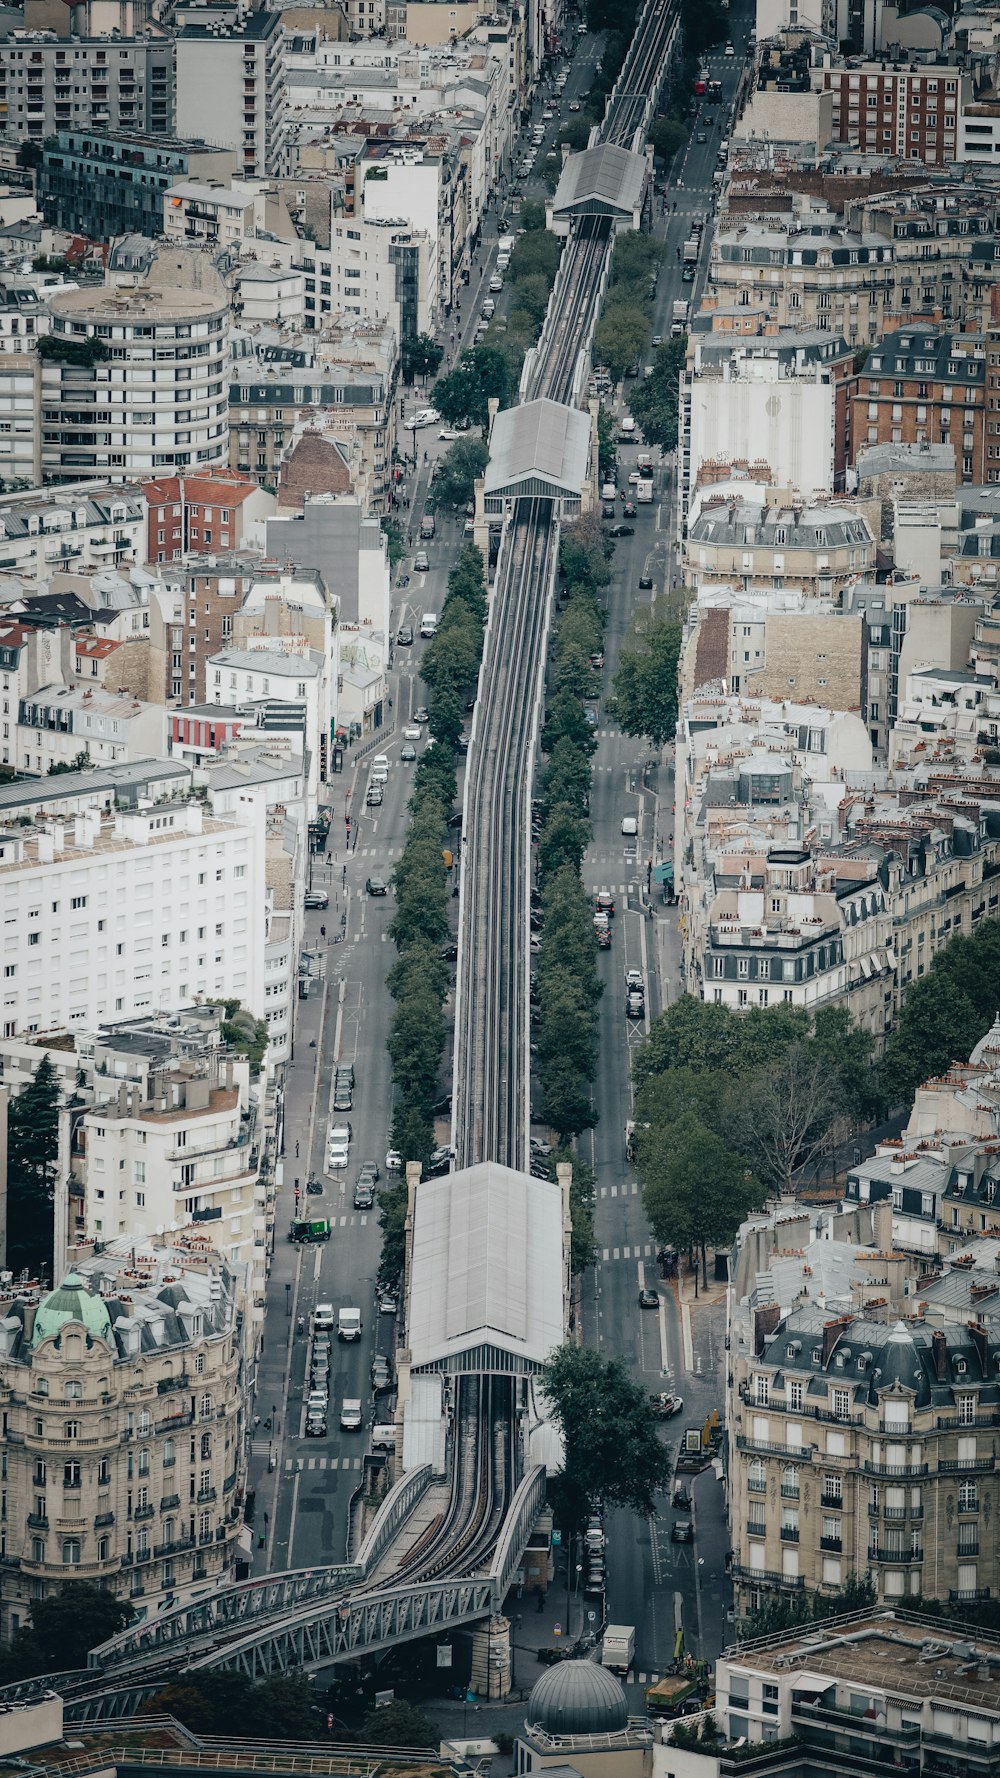 an aerial view of a city with a train on the tracks